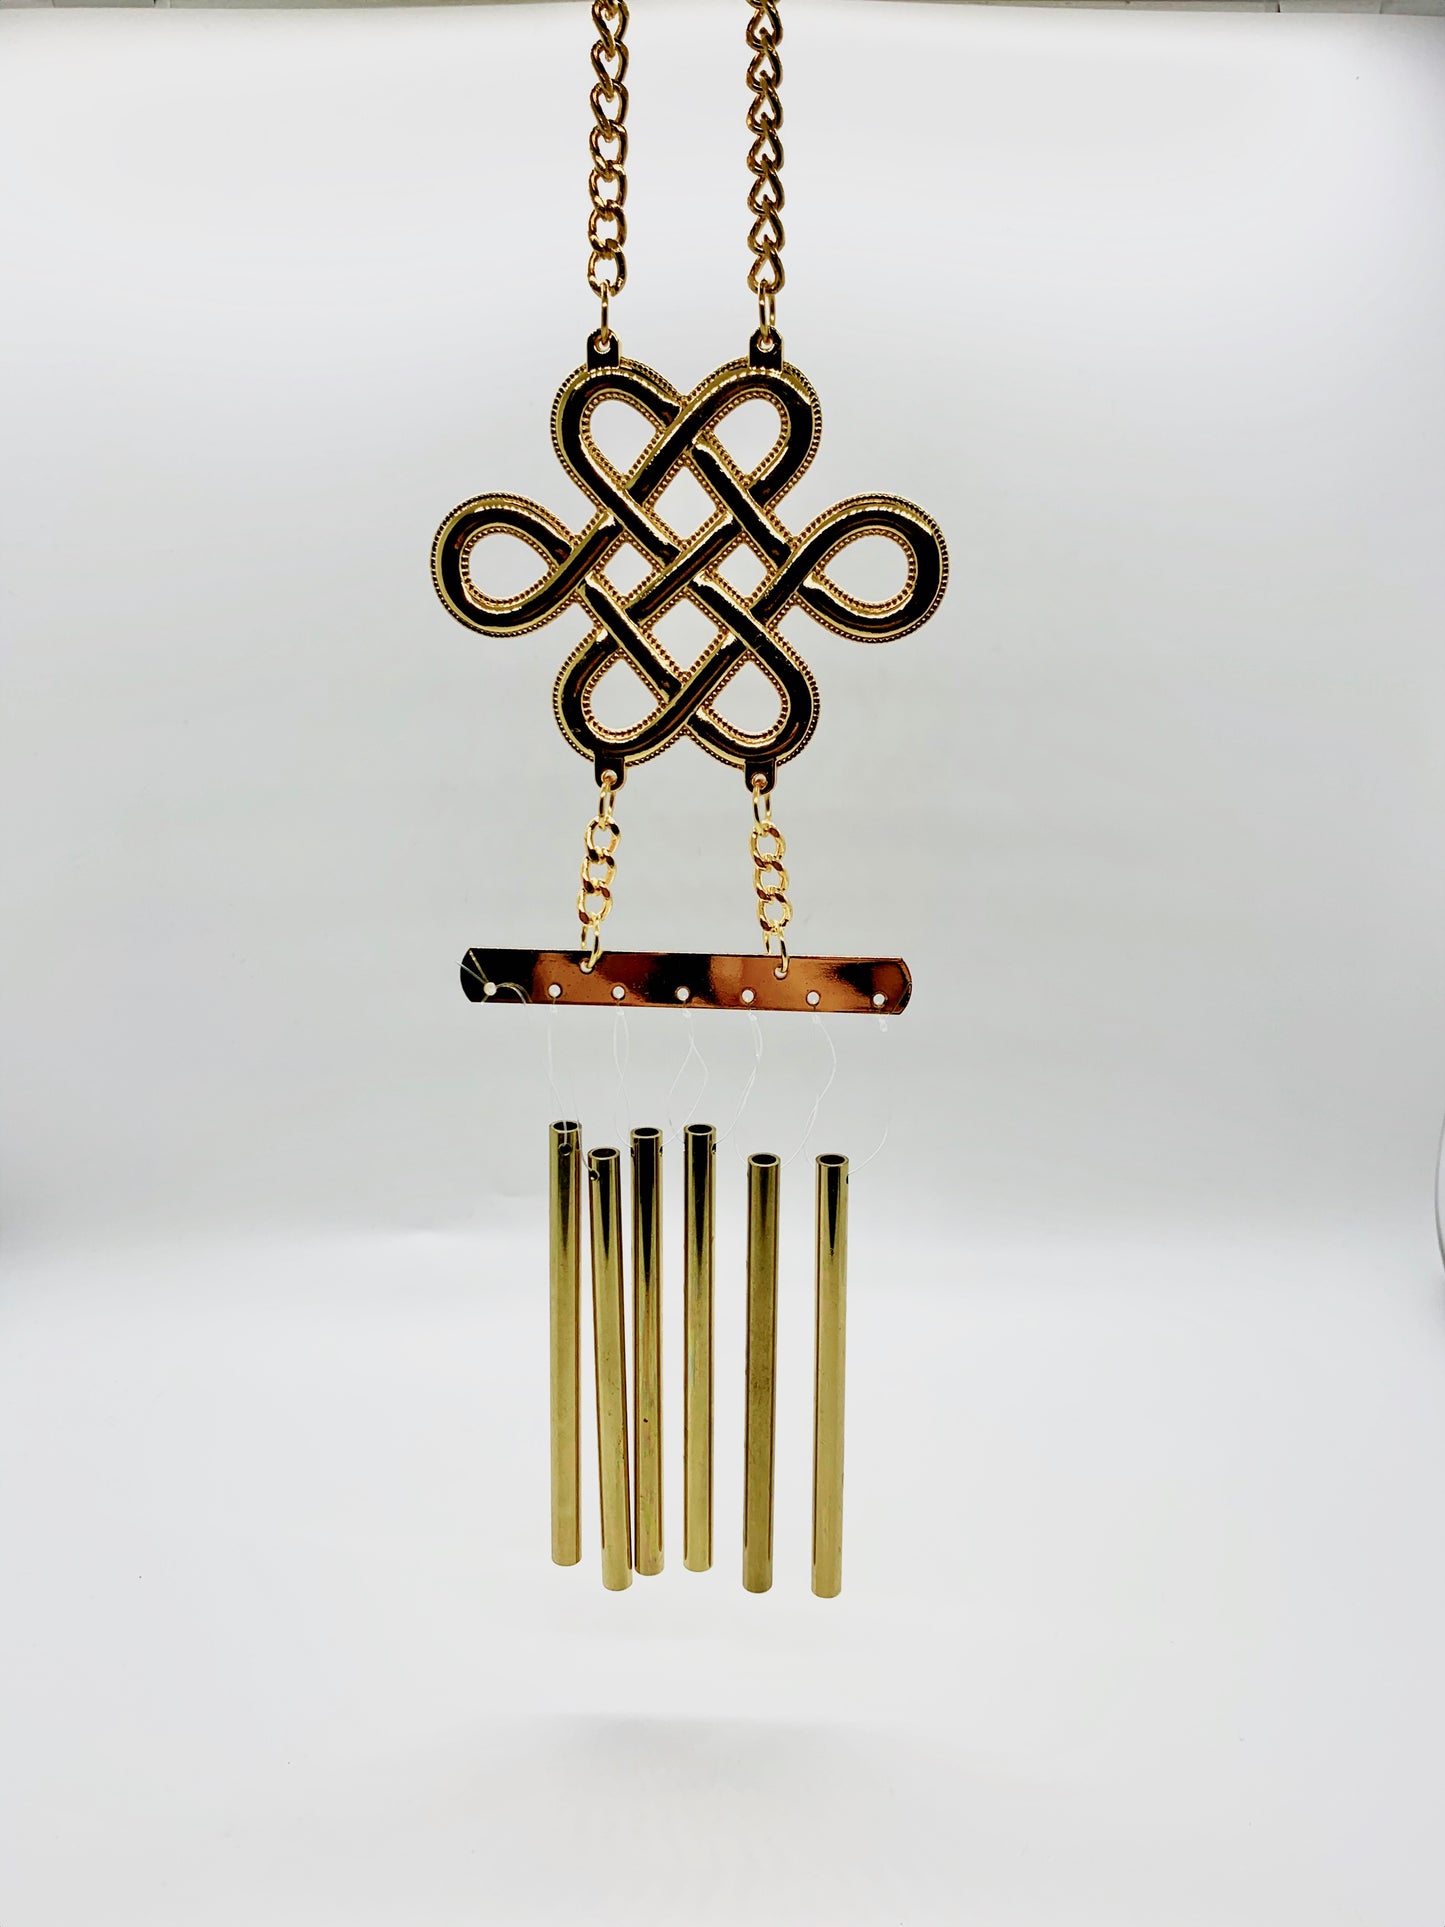 9698 - Mystic Knot 6 Rods Metal Wind Chime